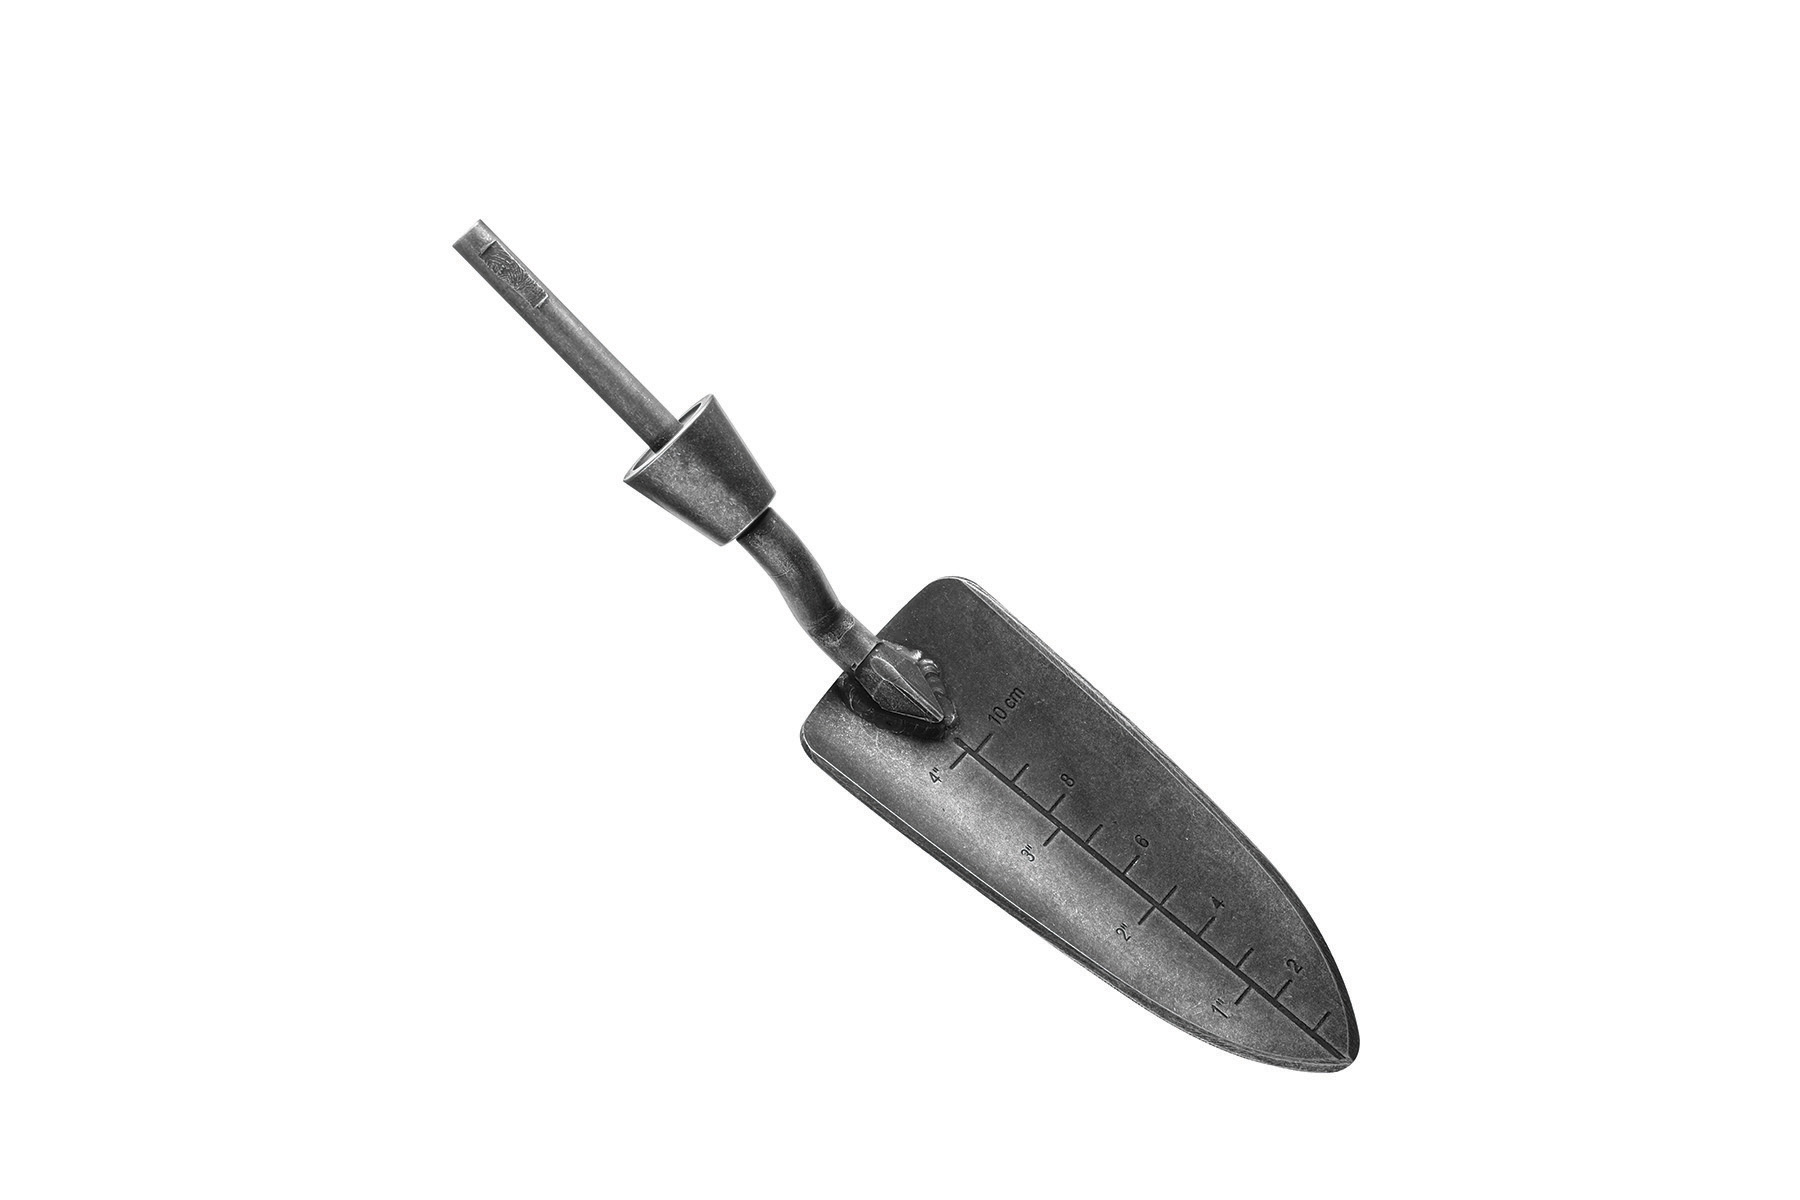 The Transplanter has a tightly curved 2'' wide blade, with markings up to 4'' (and 10cm) for transplanting to precise depths.